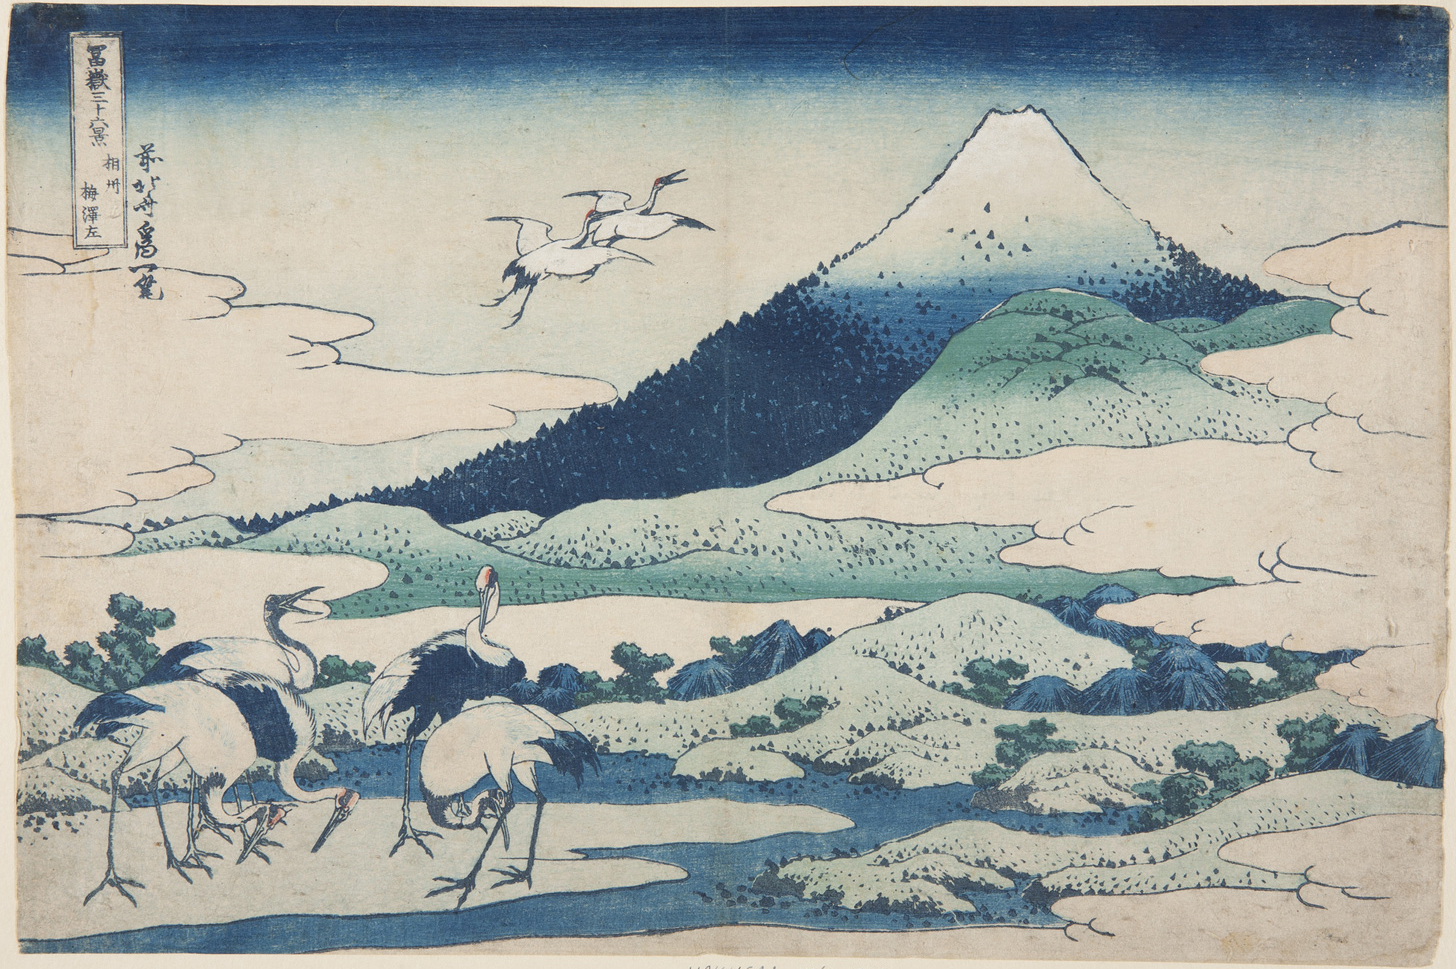 Japanese print of a landscape. In the foreground are five storks. Two additional storks fly over the landscape of hills and forests. Mount Fuji rises through the clouds.